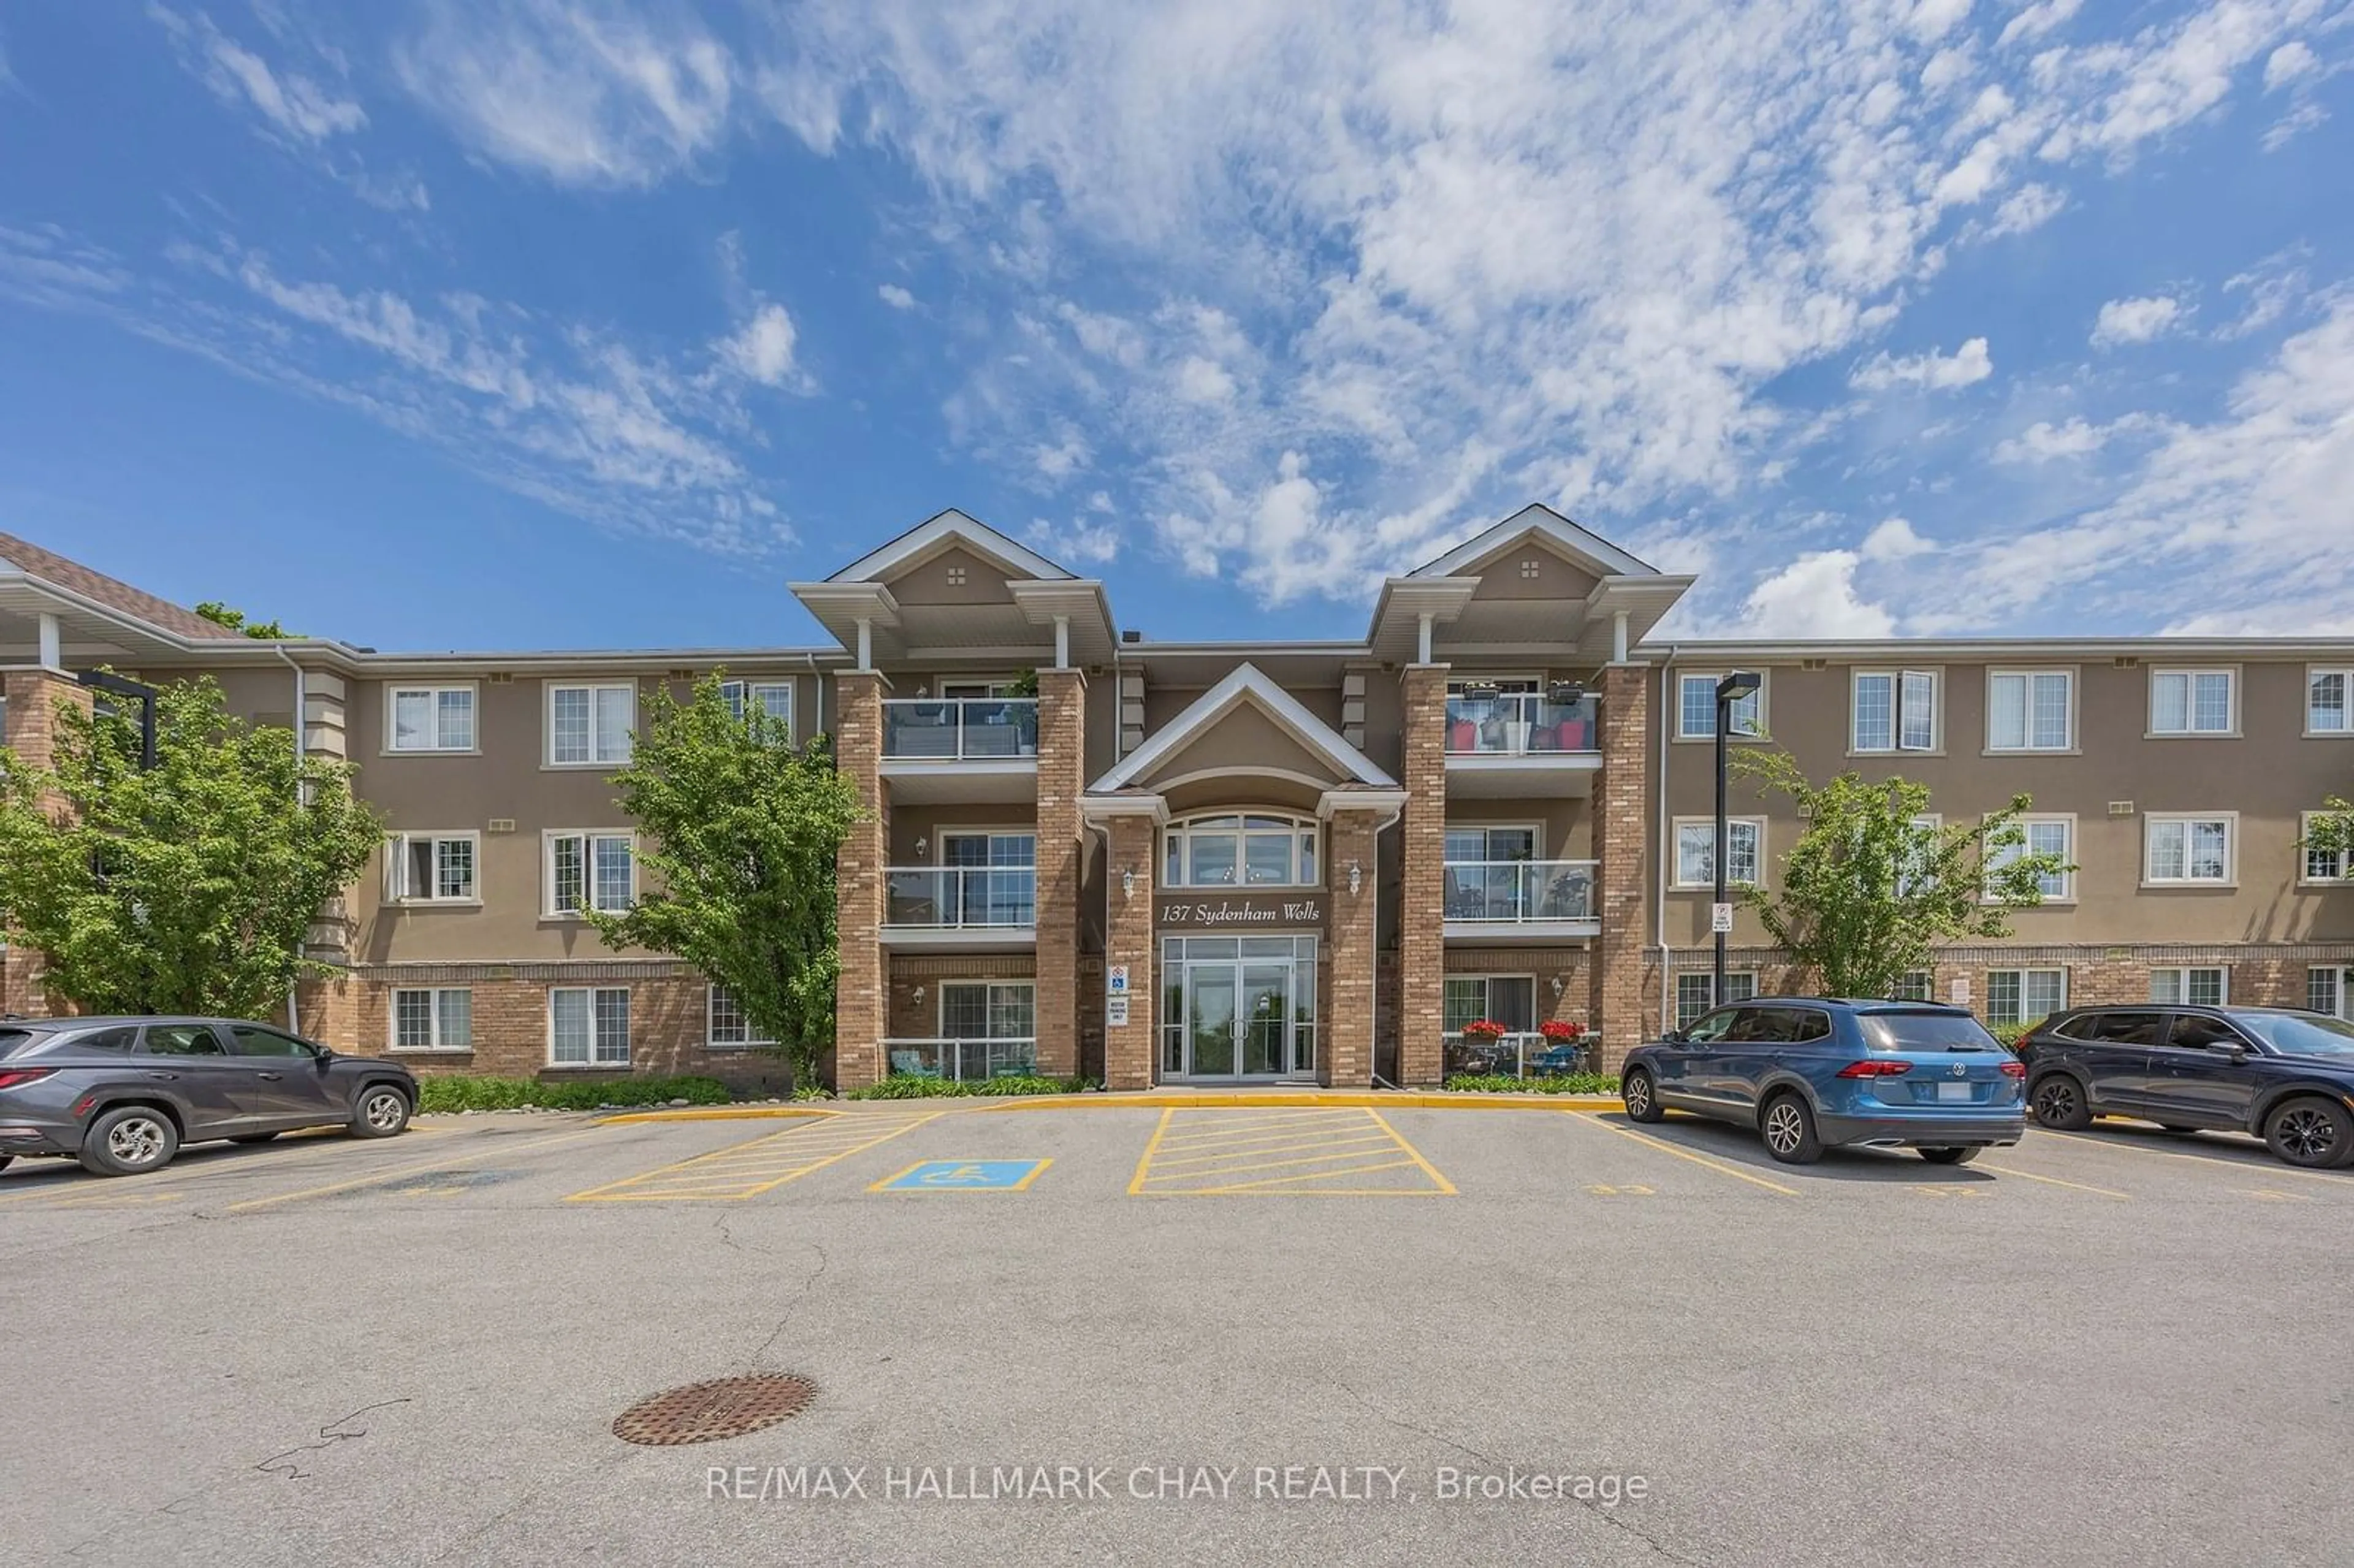 A pic from exterior of the house or condo for 137 SYDENHAM WELLS #25, Barrie Ontario L4M 0G7